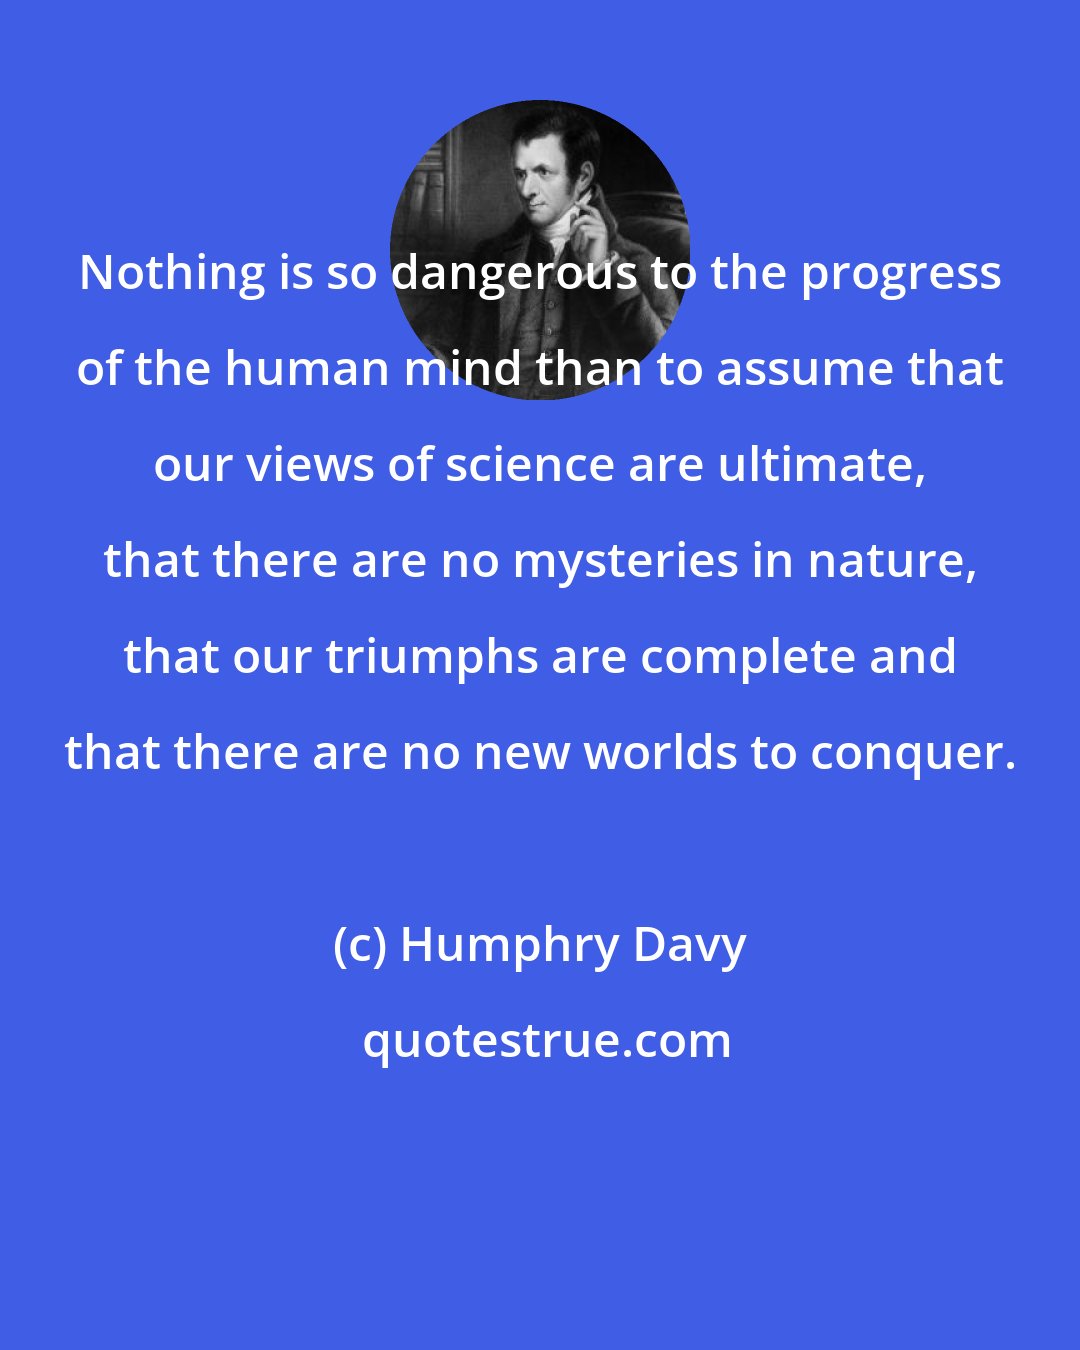 Humphry Davy: Nothing is so dangerous to the progress of the human mind than to assume that our views of science are ultimate, that there are no mysteries in nature, that our triumphs are complete and that there are no new worlds to conquer.